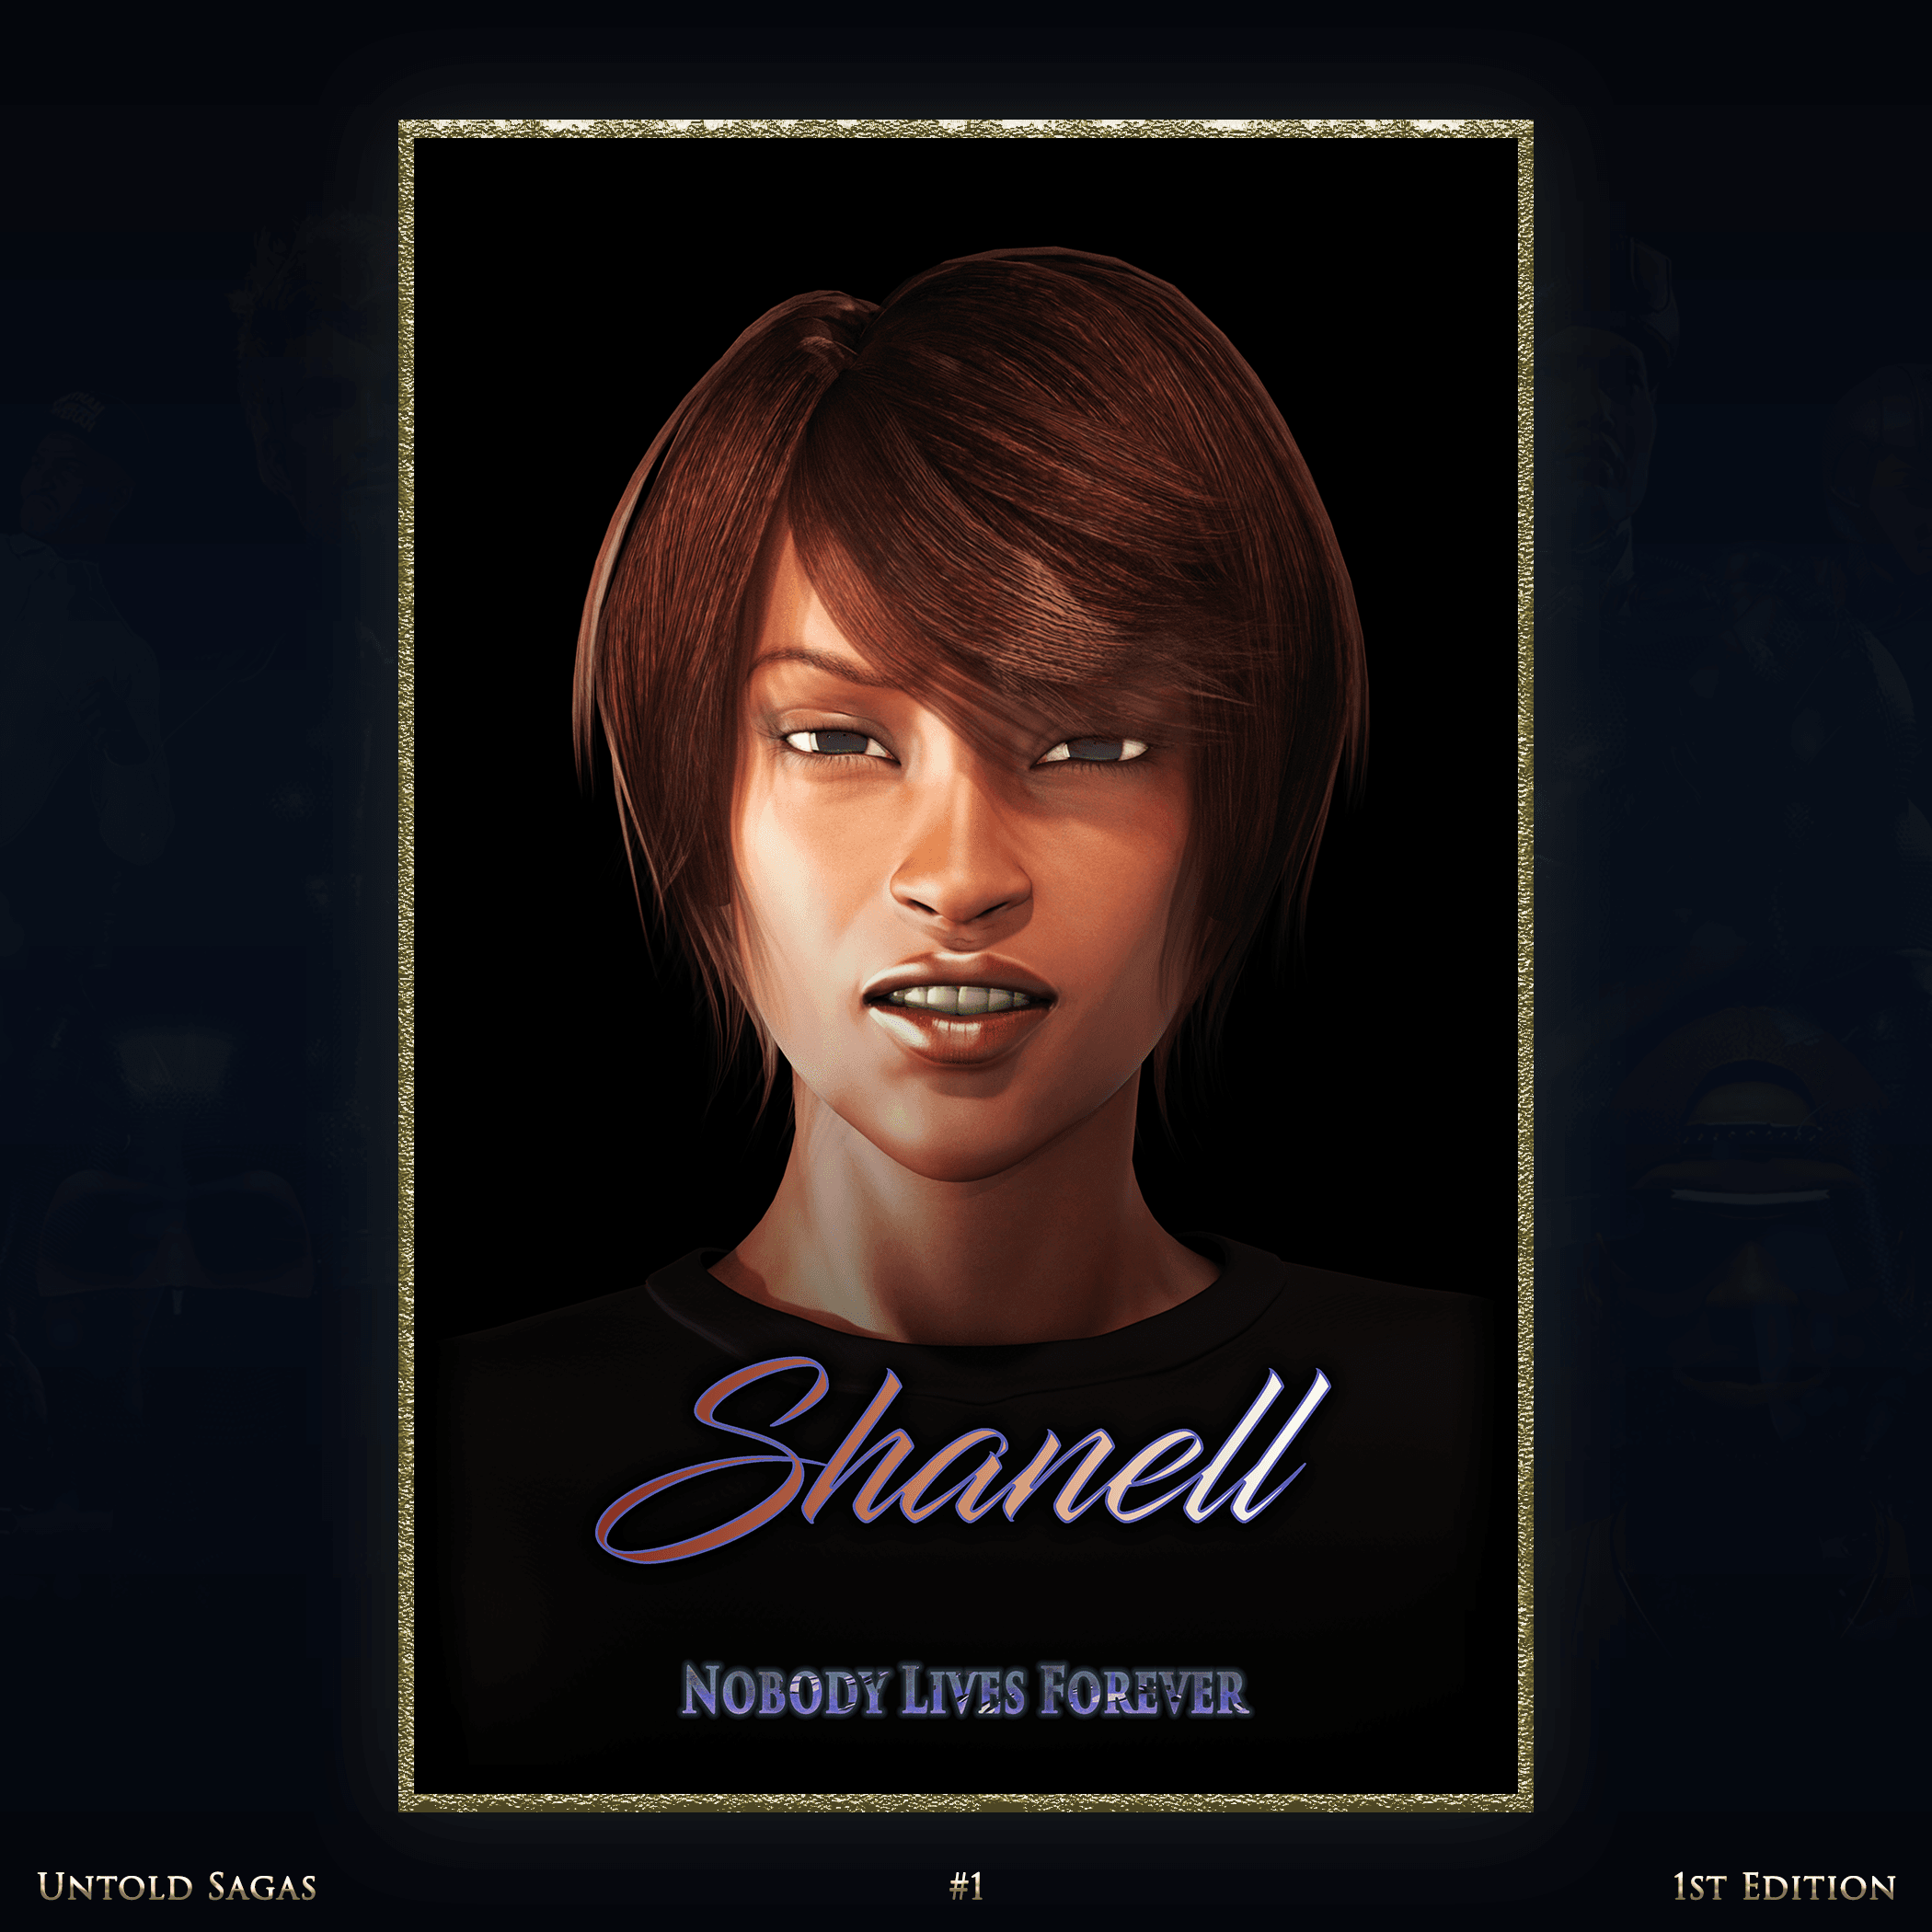 Character Card	1st Edition	Shanell	#1